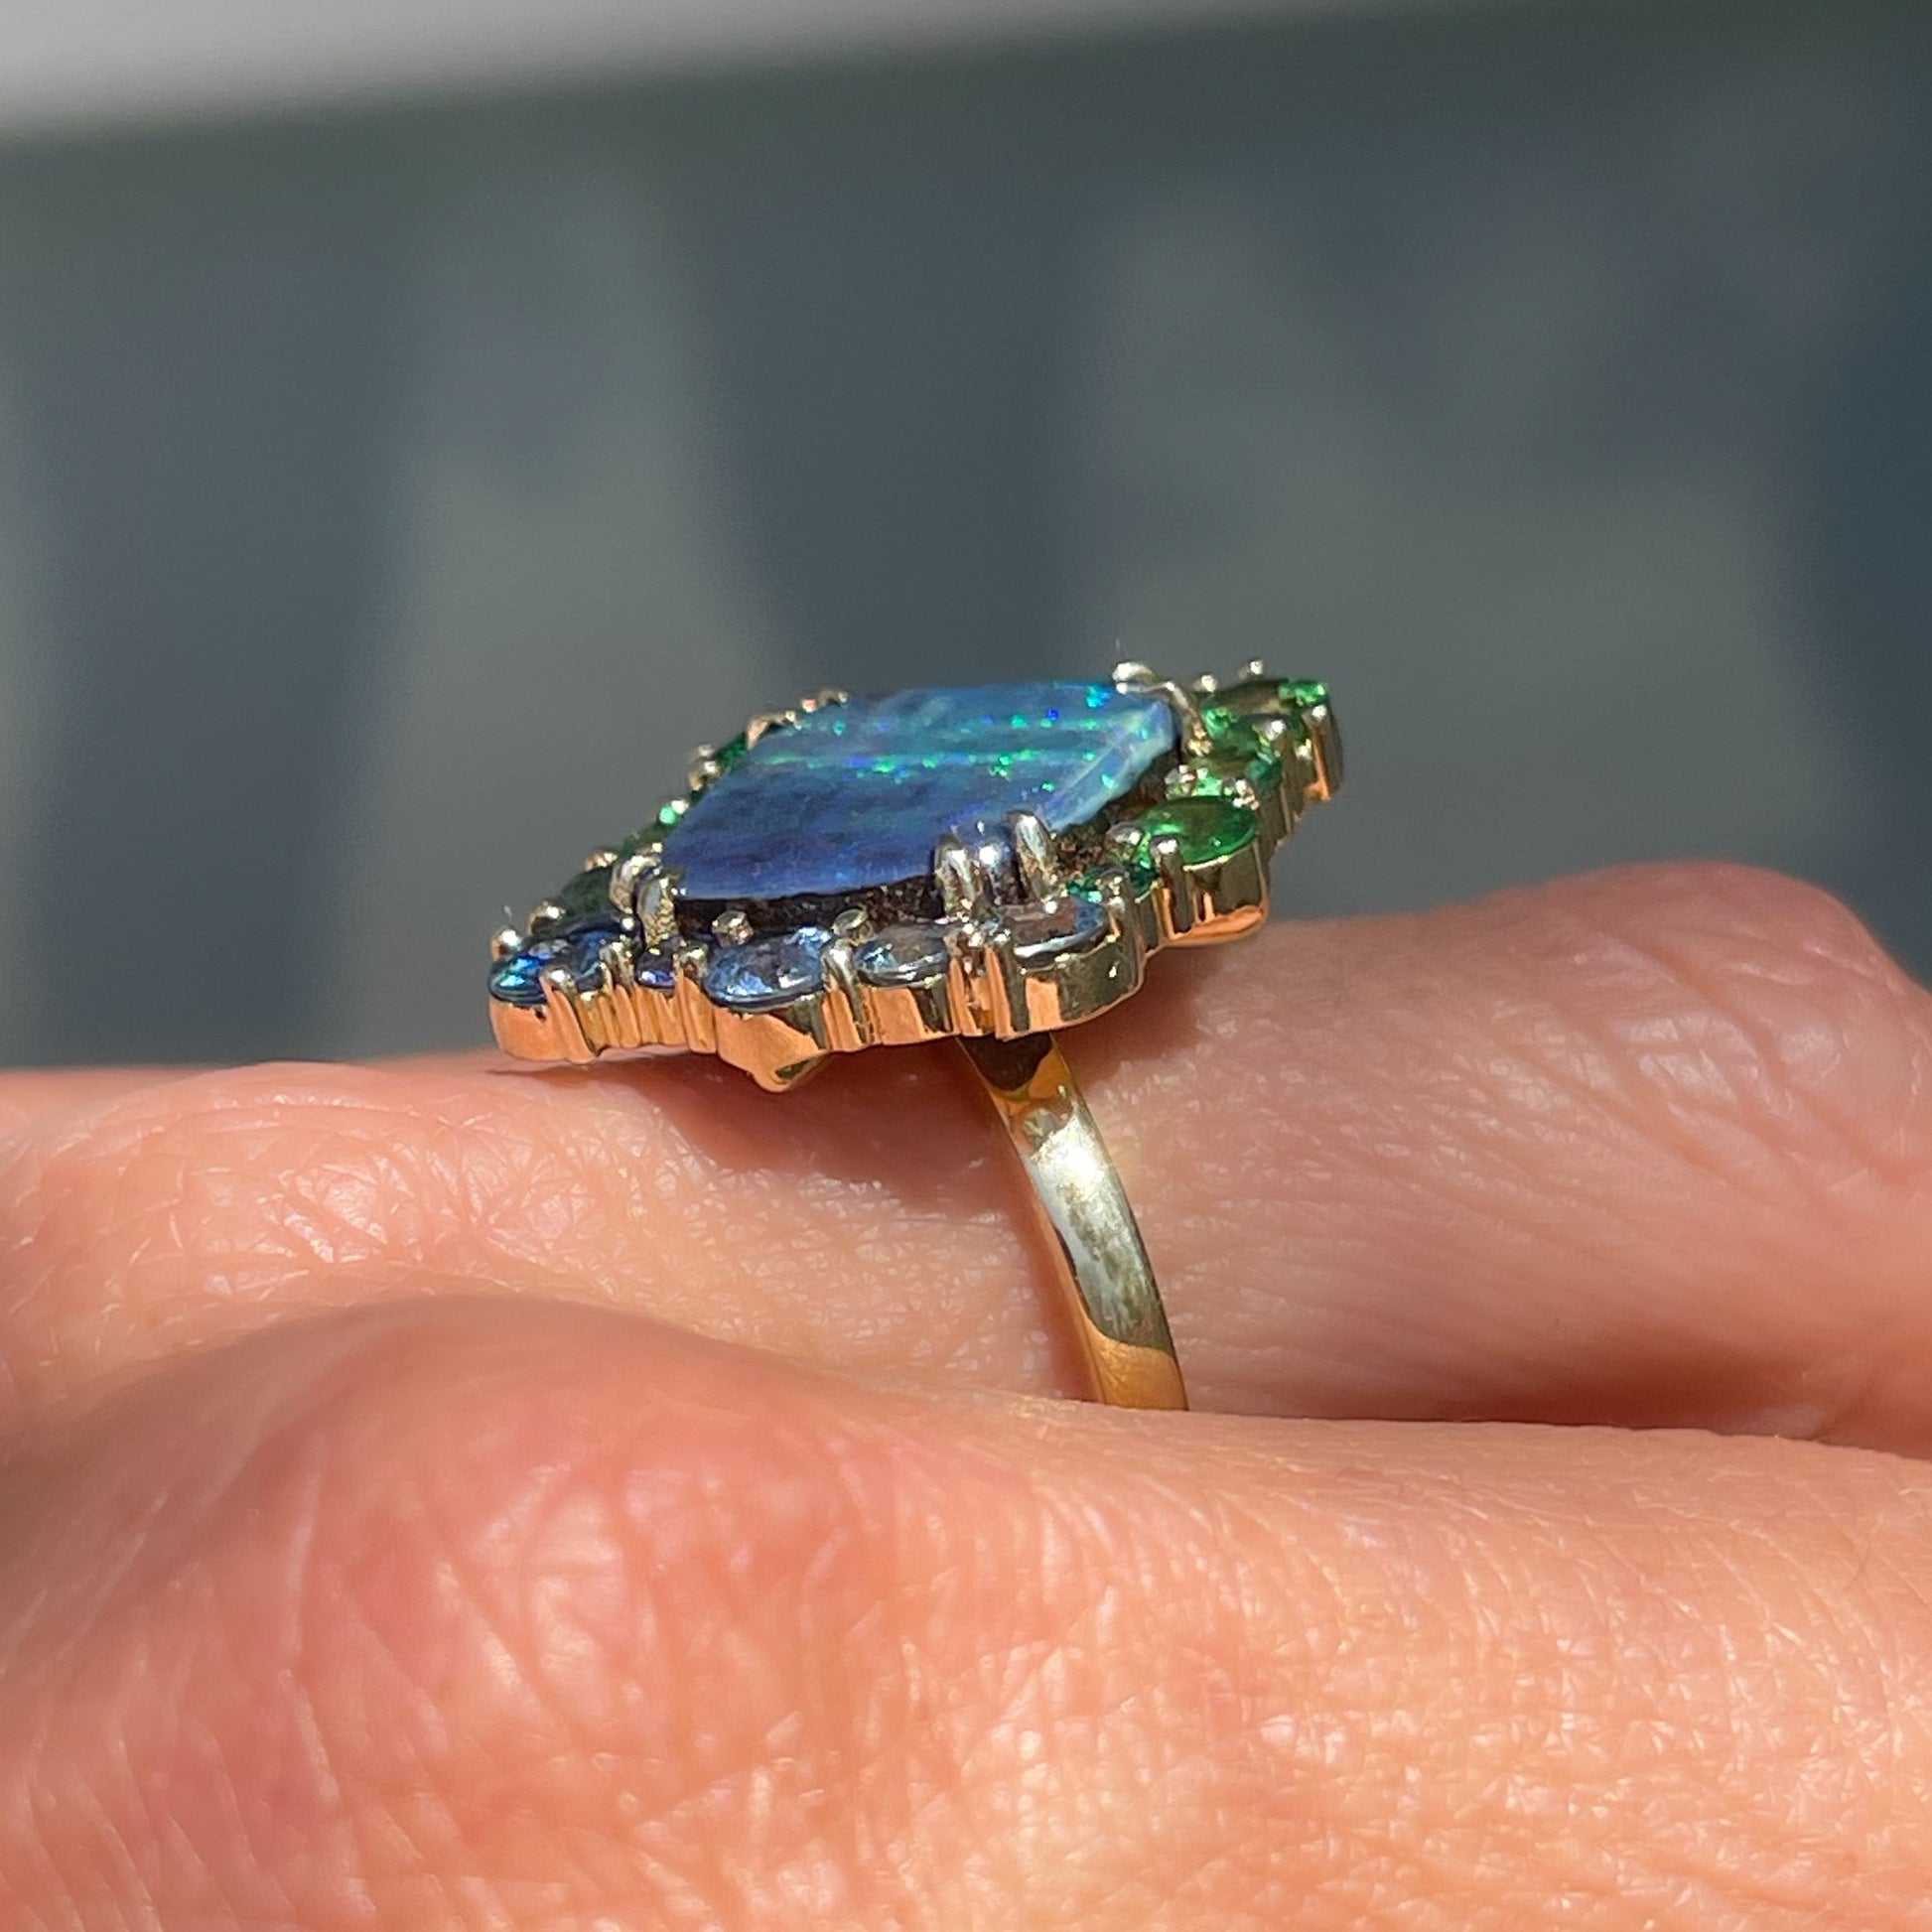 Profile shot of an Australian Opal Ring by NIXIN Jewelry, showing the halo of blue sapphires and green garnets around the opal.